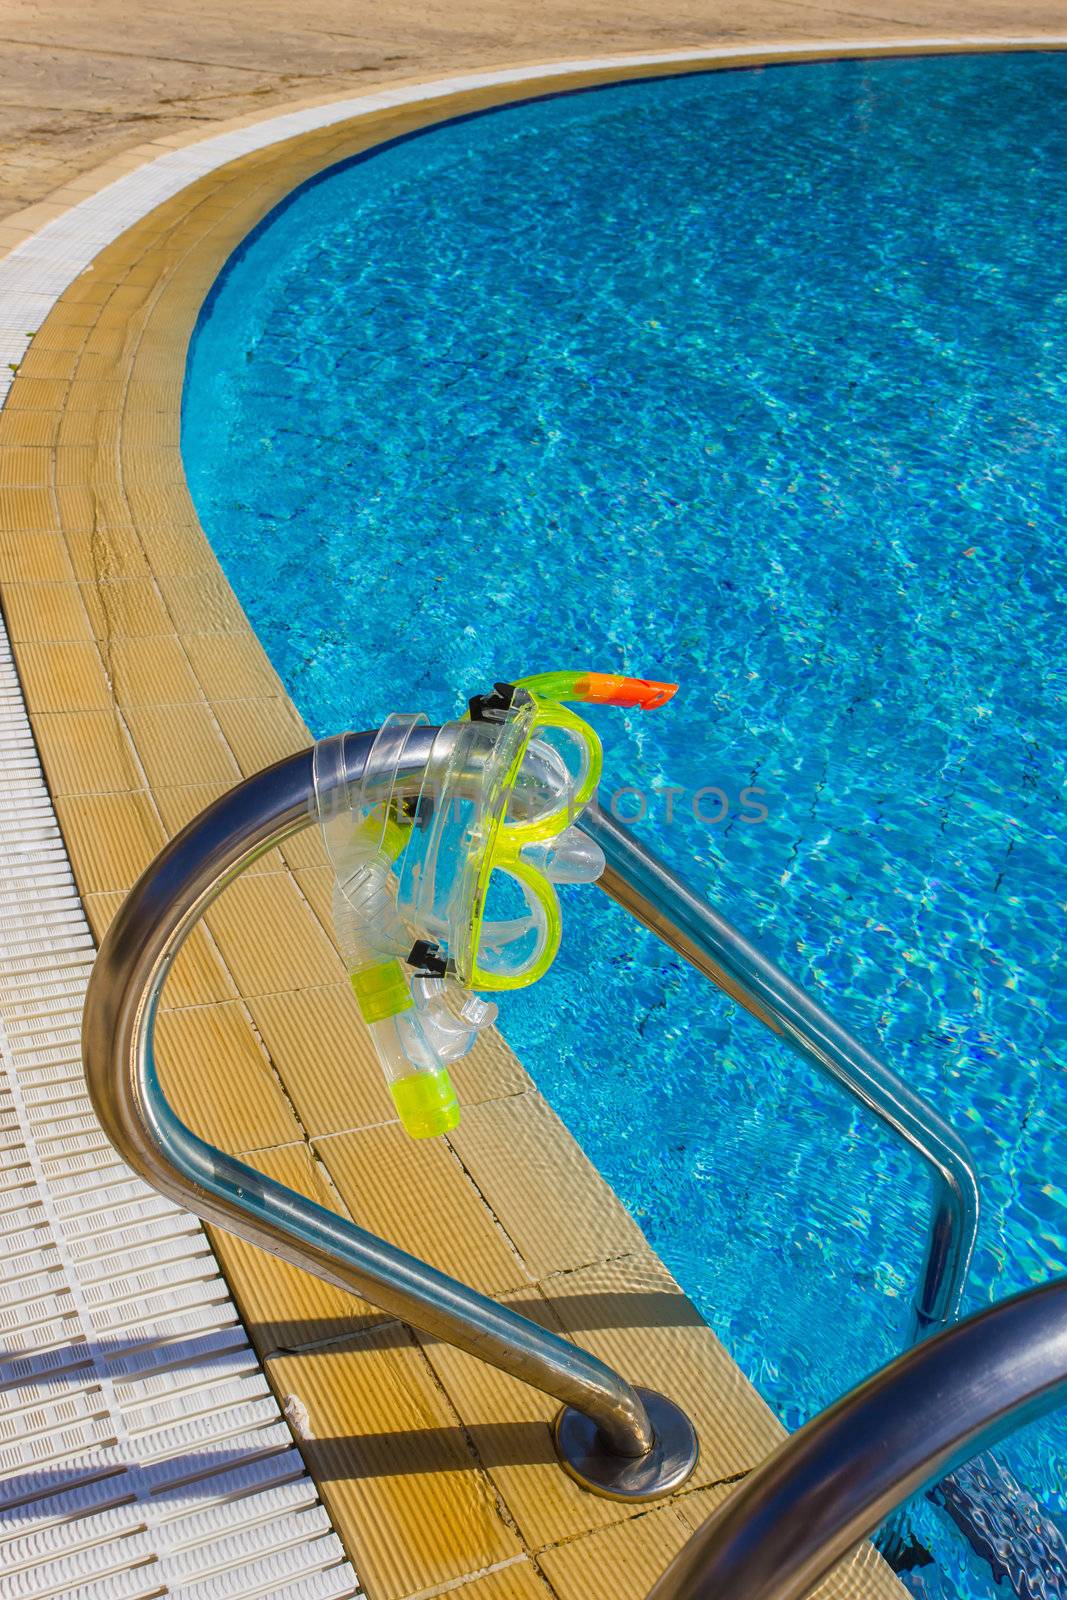 Mask and snorkel for diving near the pool by oleg_zhukov